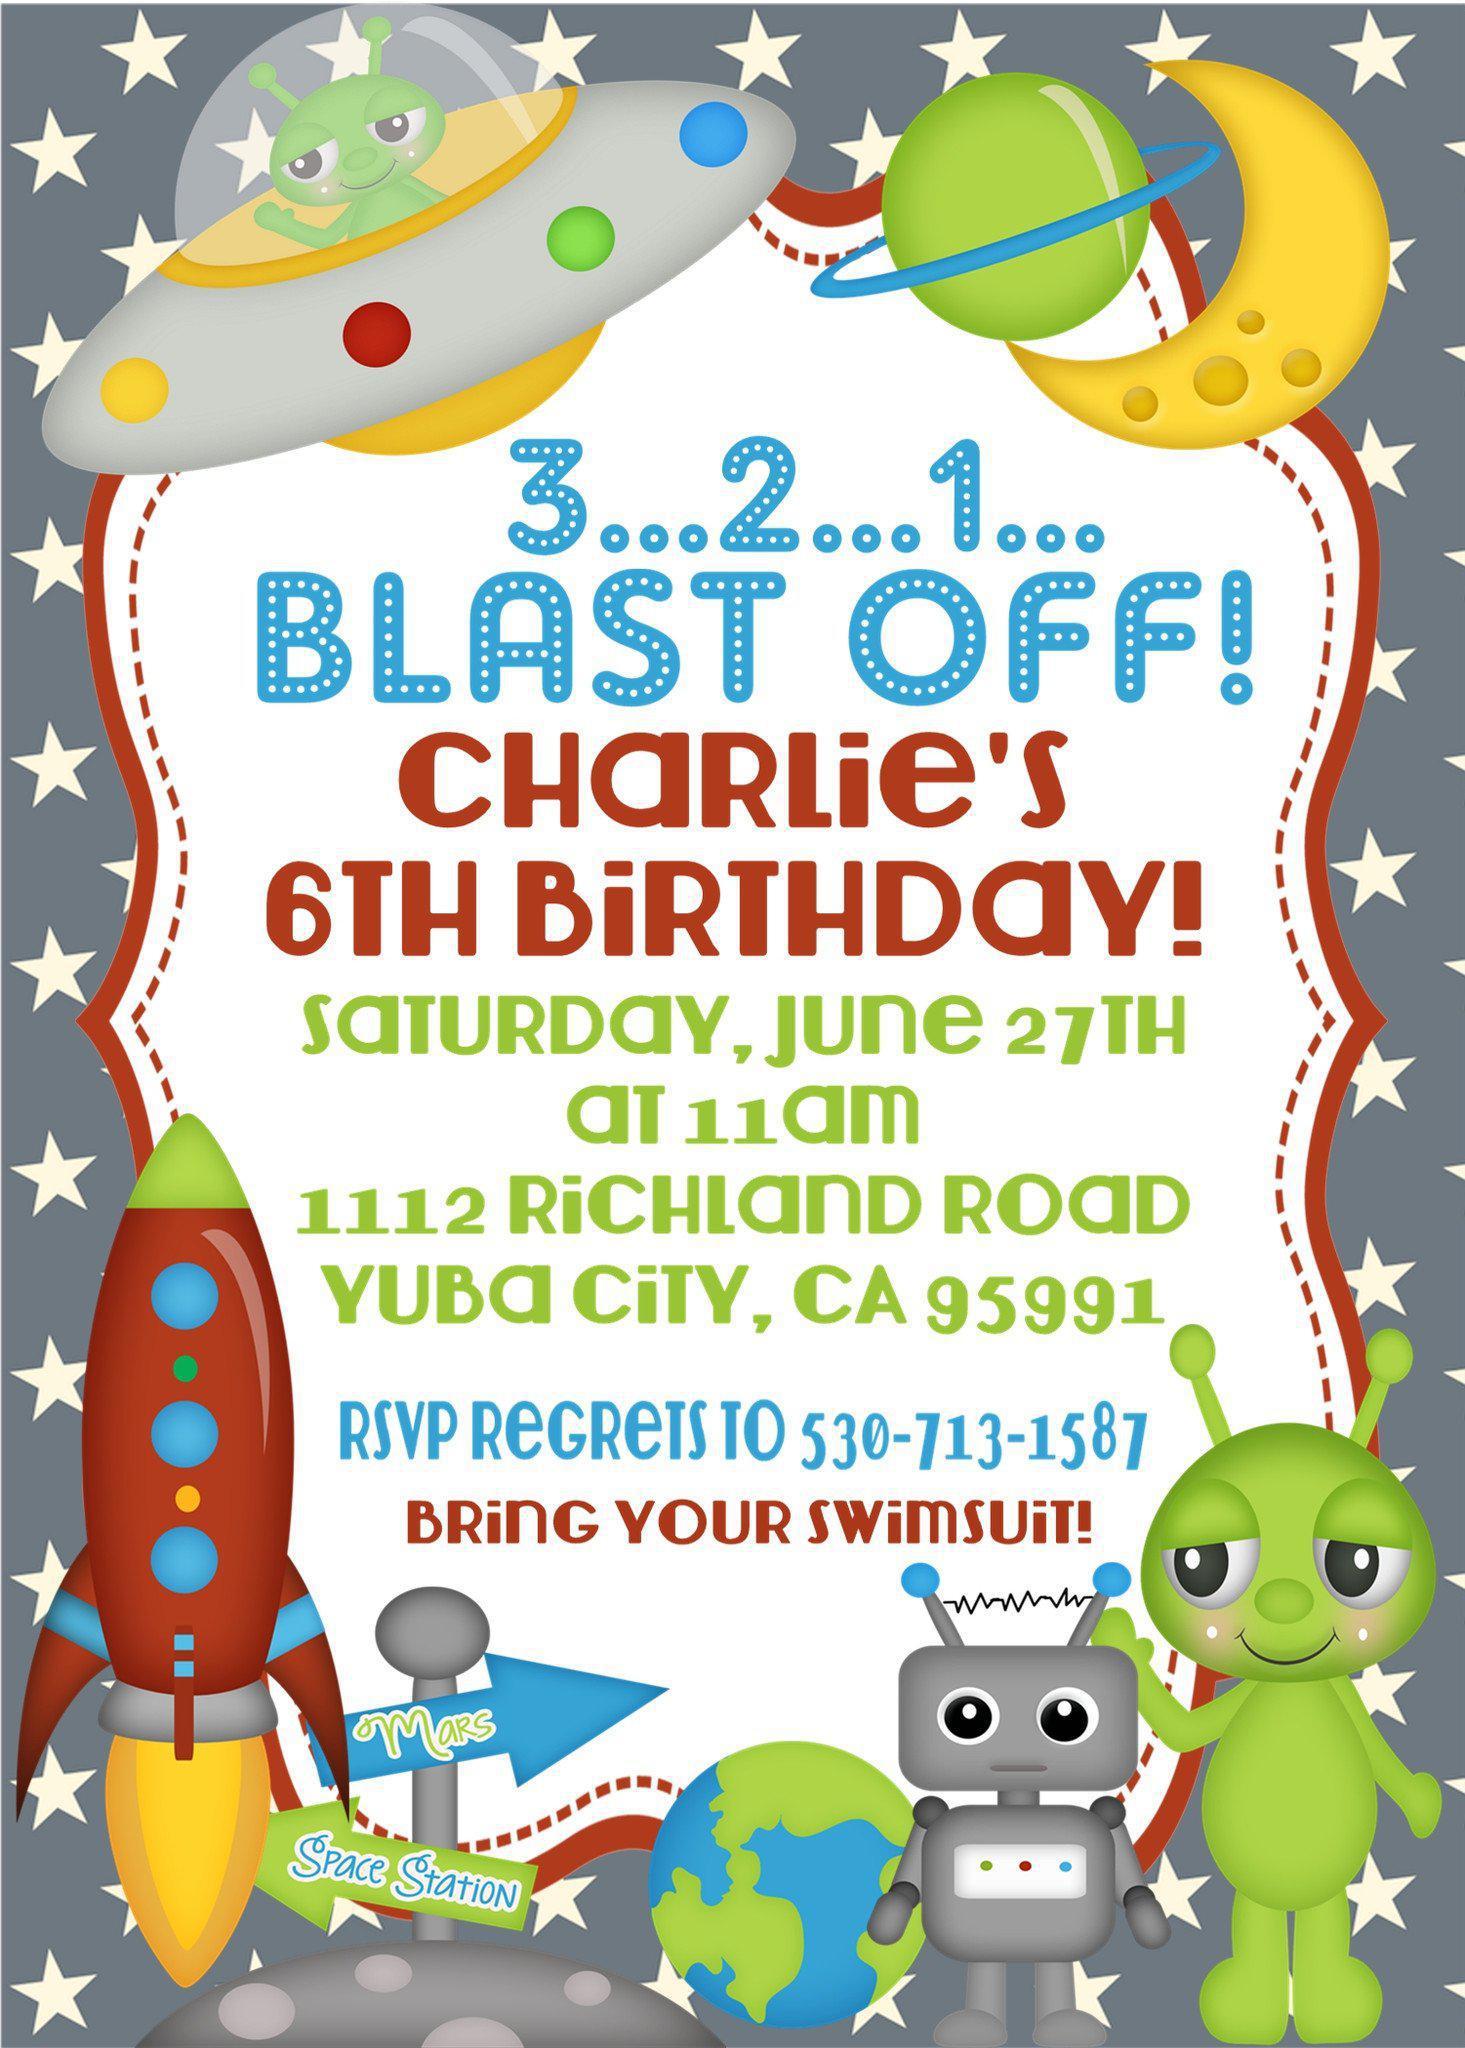 Outer Space Birthday Party Invitations